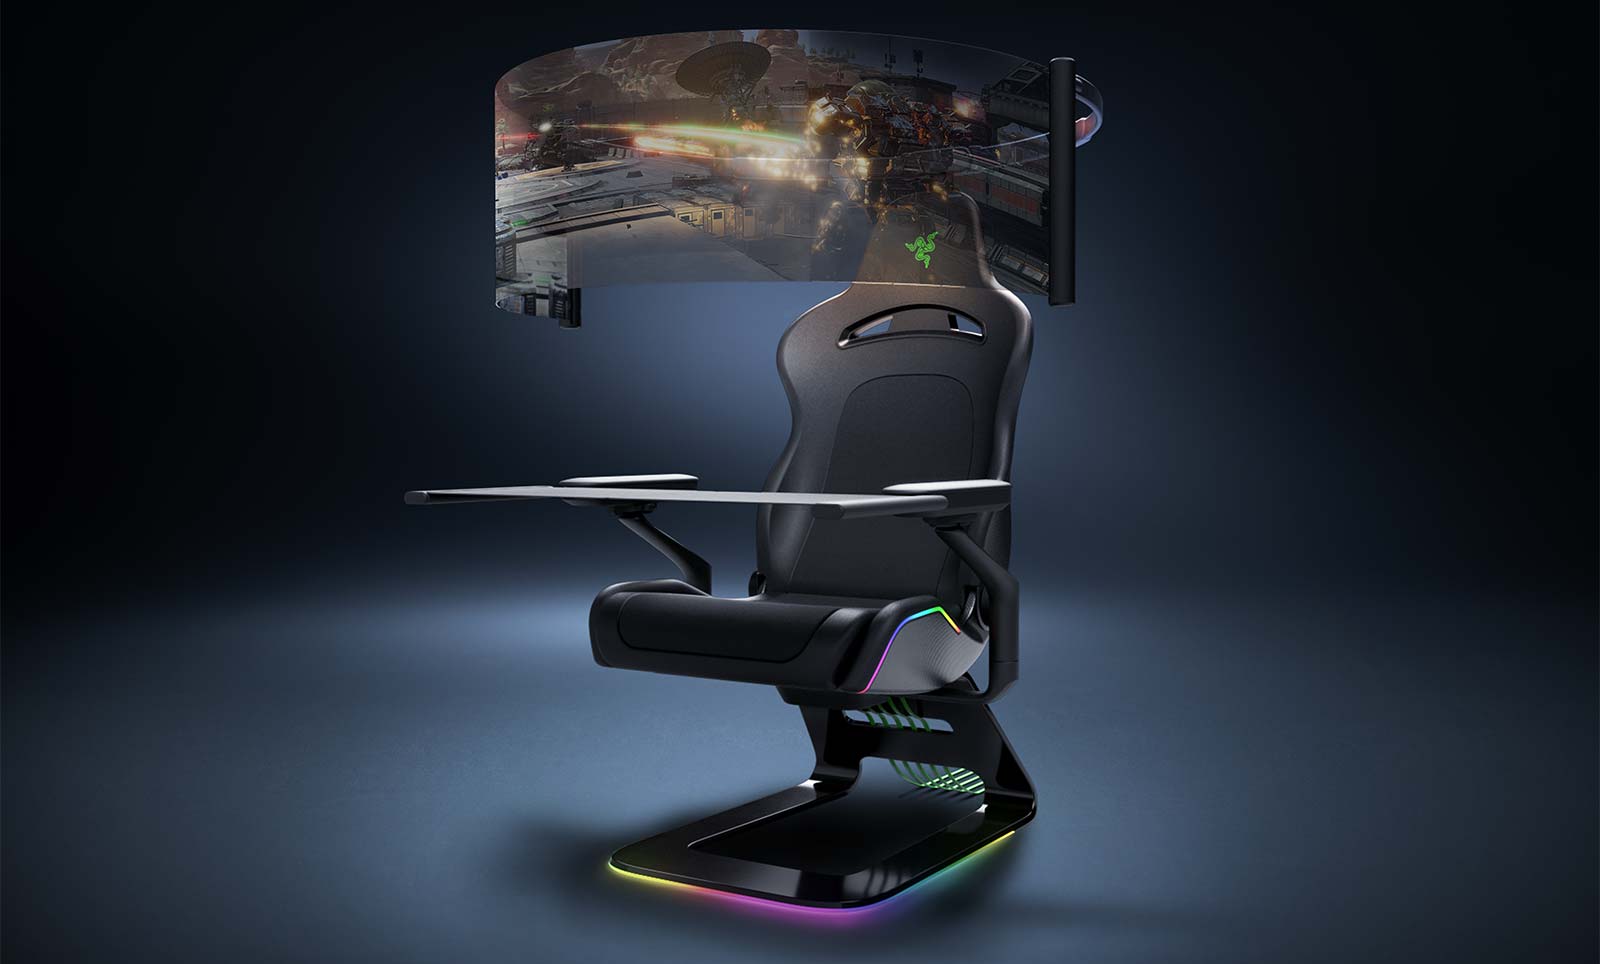 Razer's Project Brooklyn at CES 2021